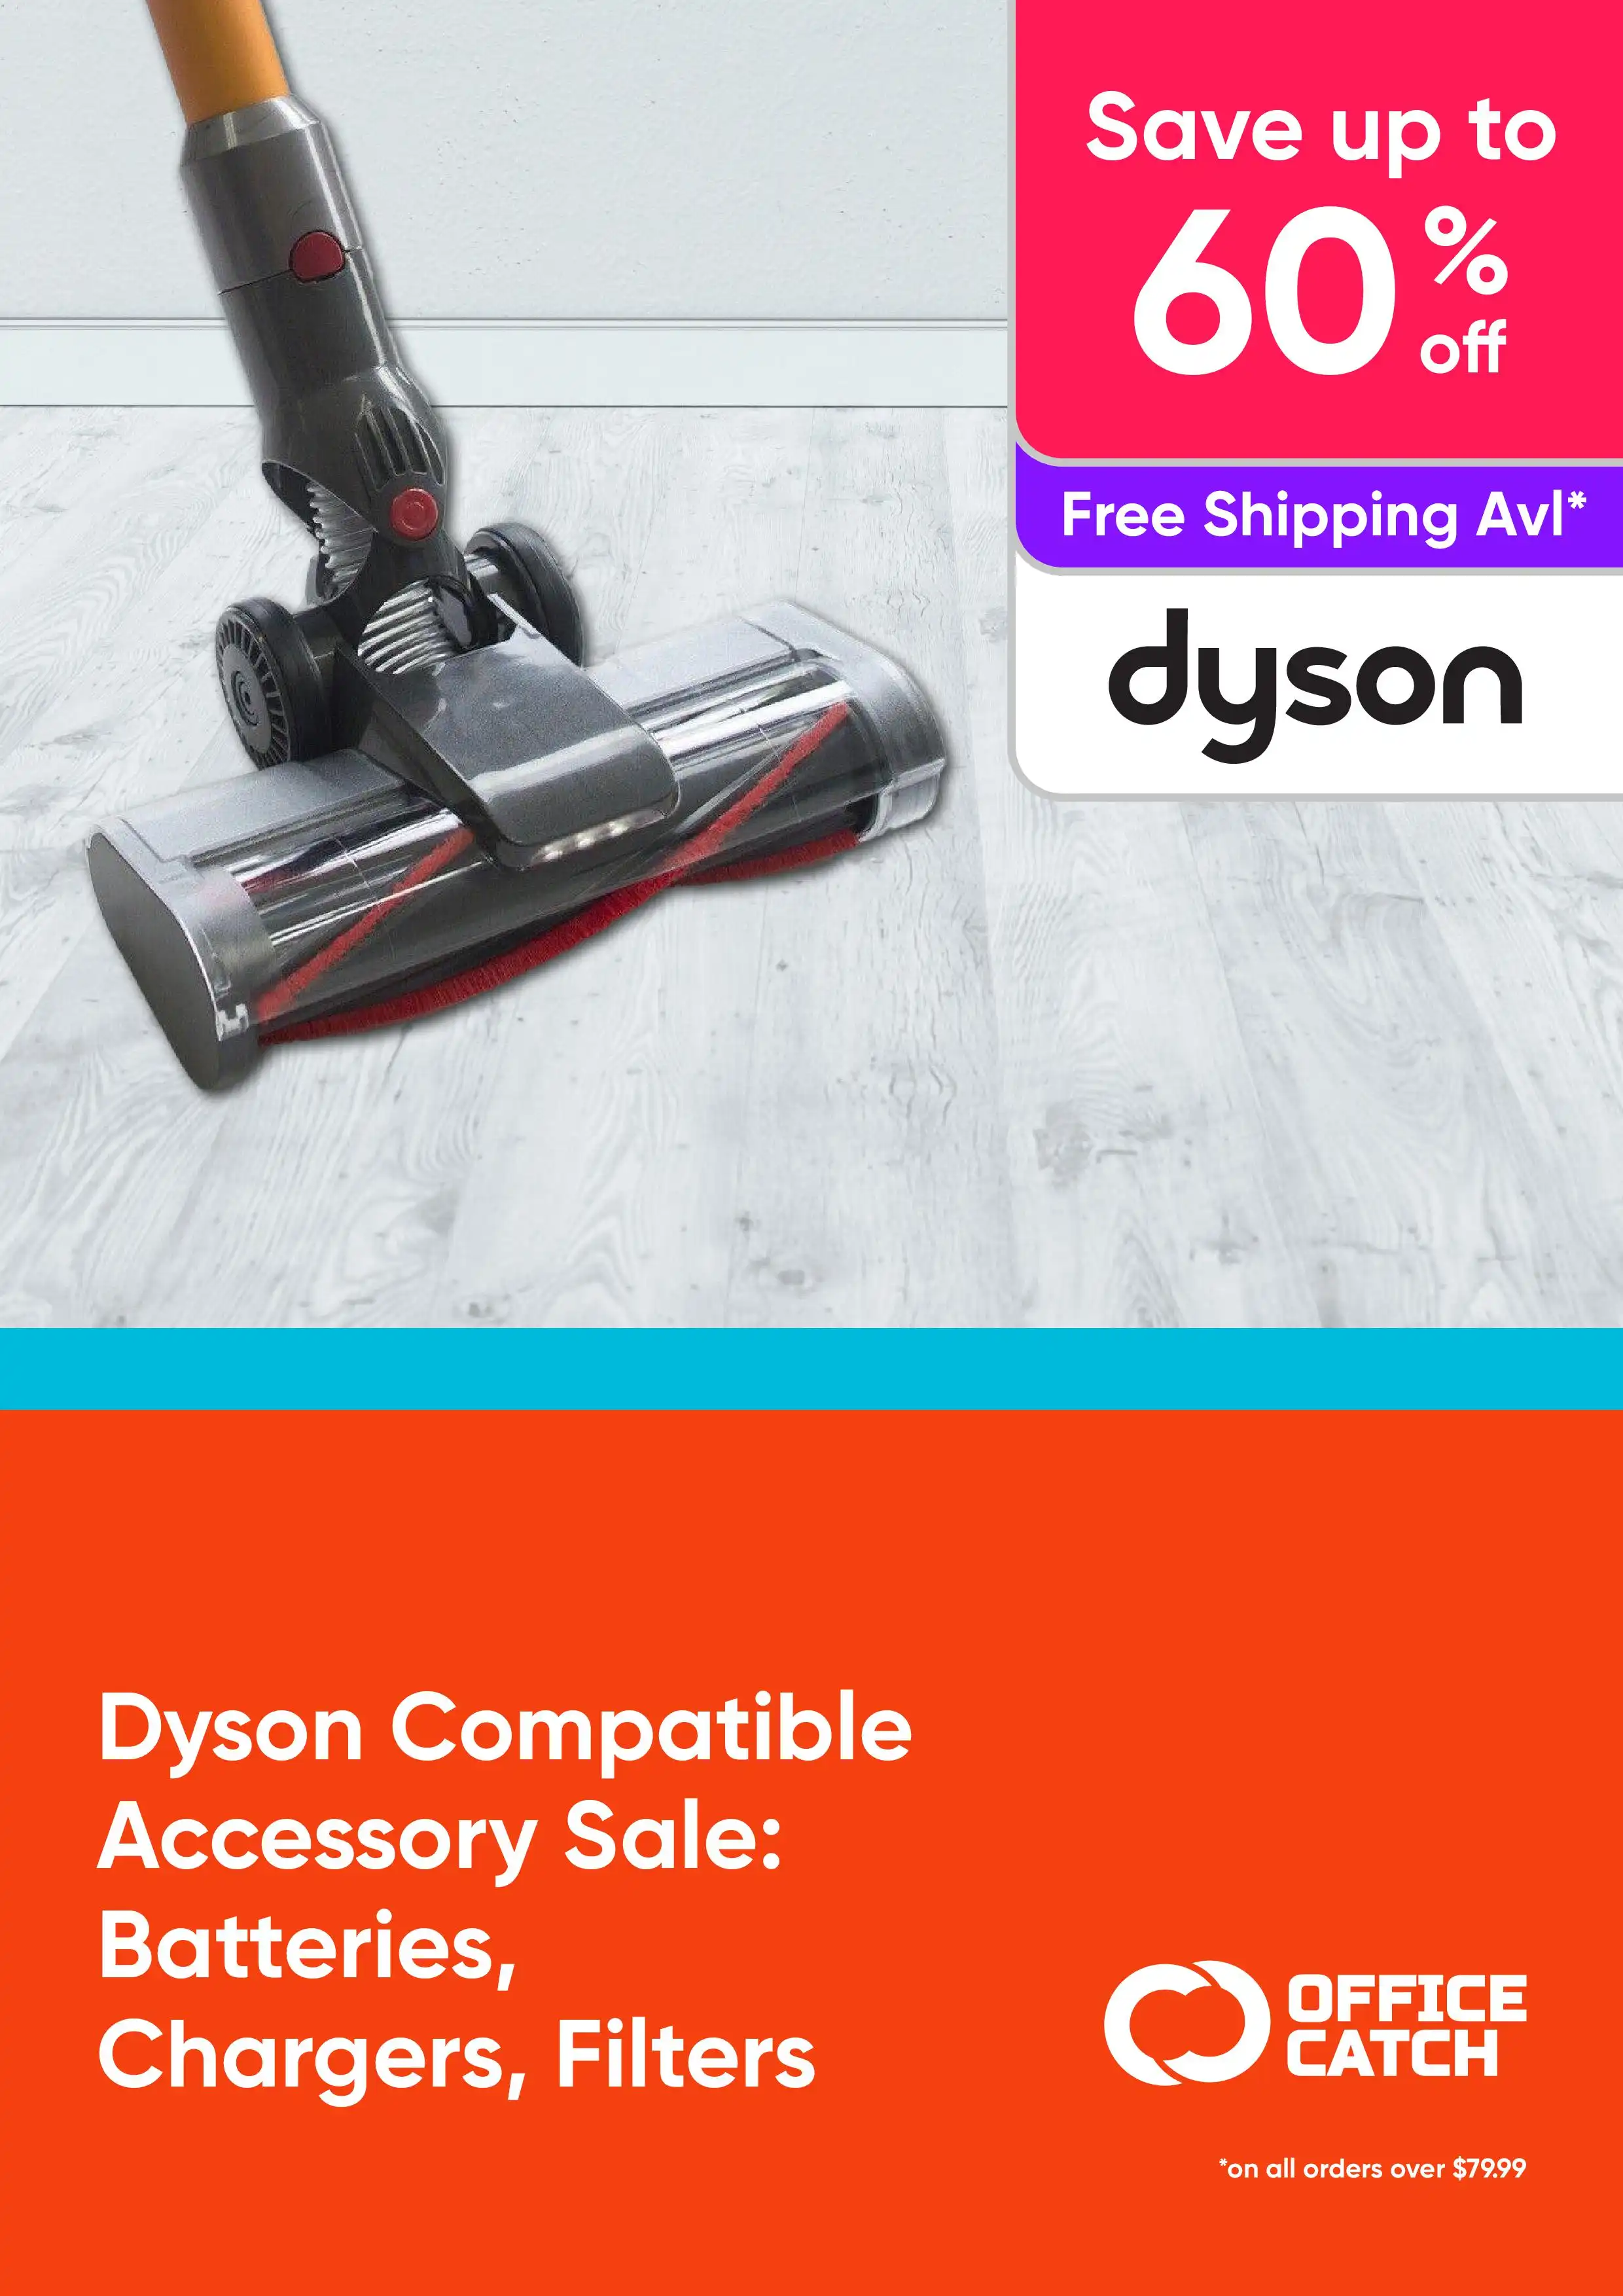 Dyson Compatible Accessory Sale: Batteries, Chargers, Filters